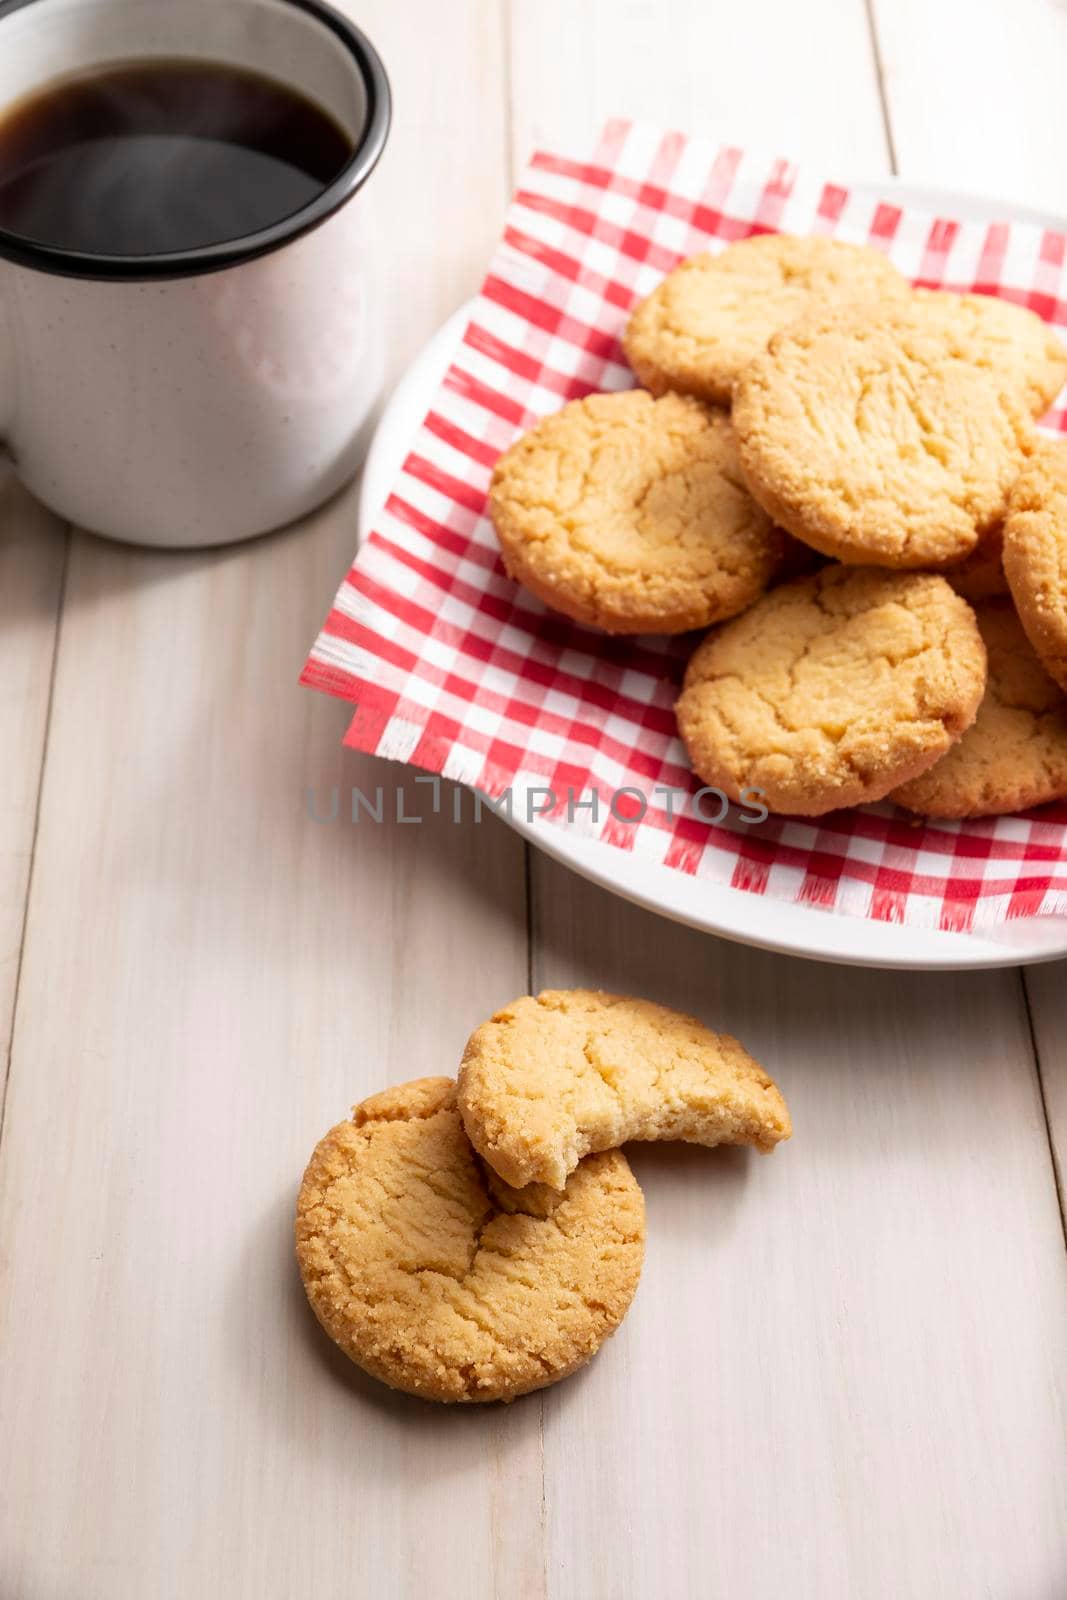 Homemade crunchy cookies and a coffee cup on white wooden rustic table